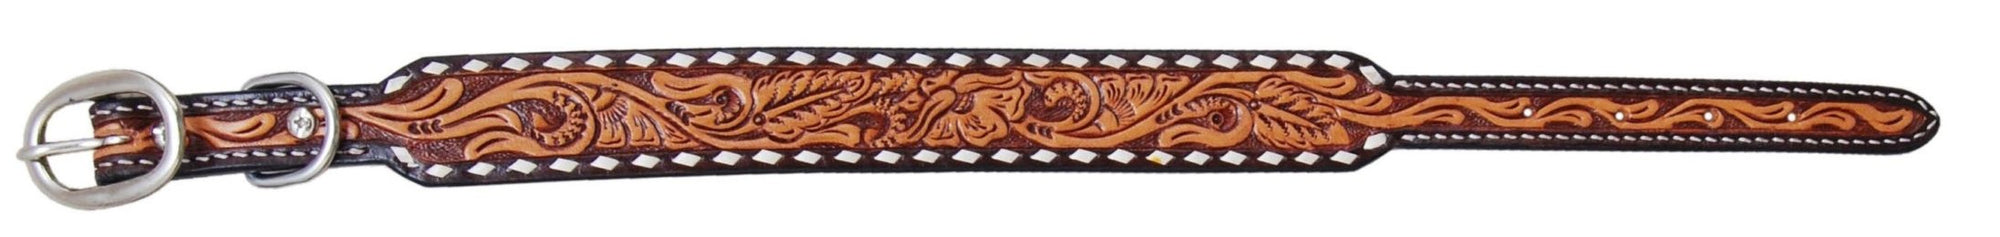 Rafter T Ranch Co. Leather Dog Collar STYLE RTDC378-M